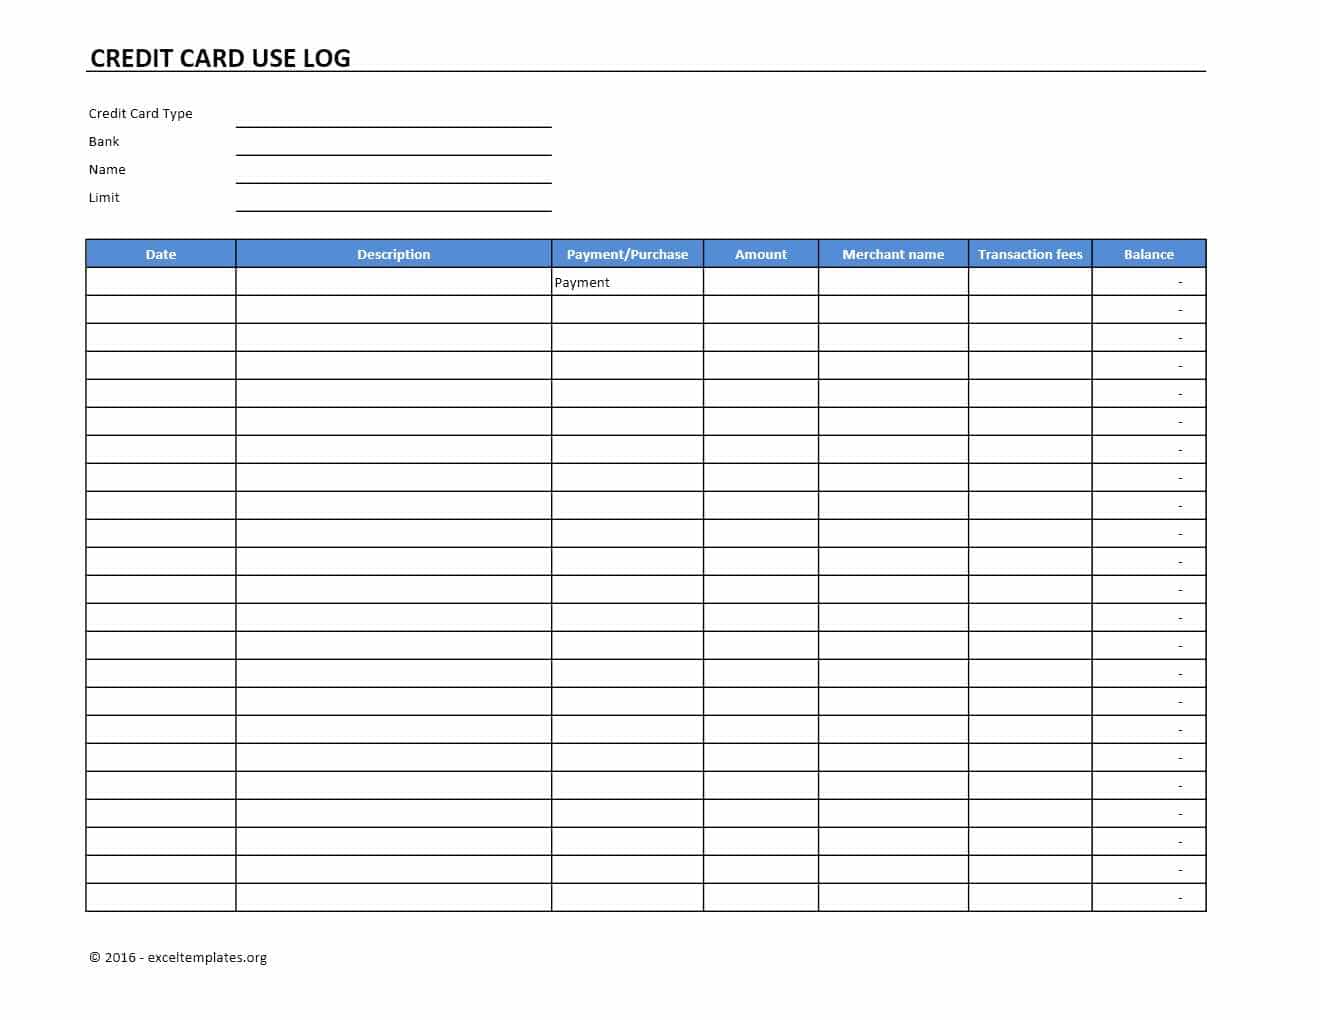 Credit Card Statement For Example Crossword Clue And Blank Credit Card Statement Template